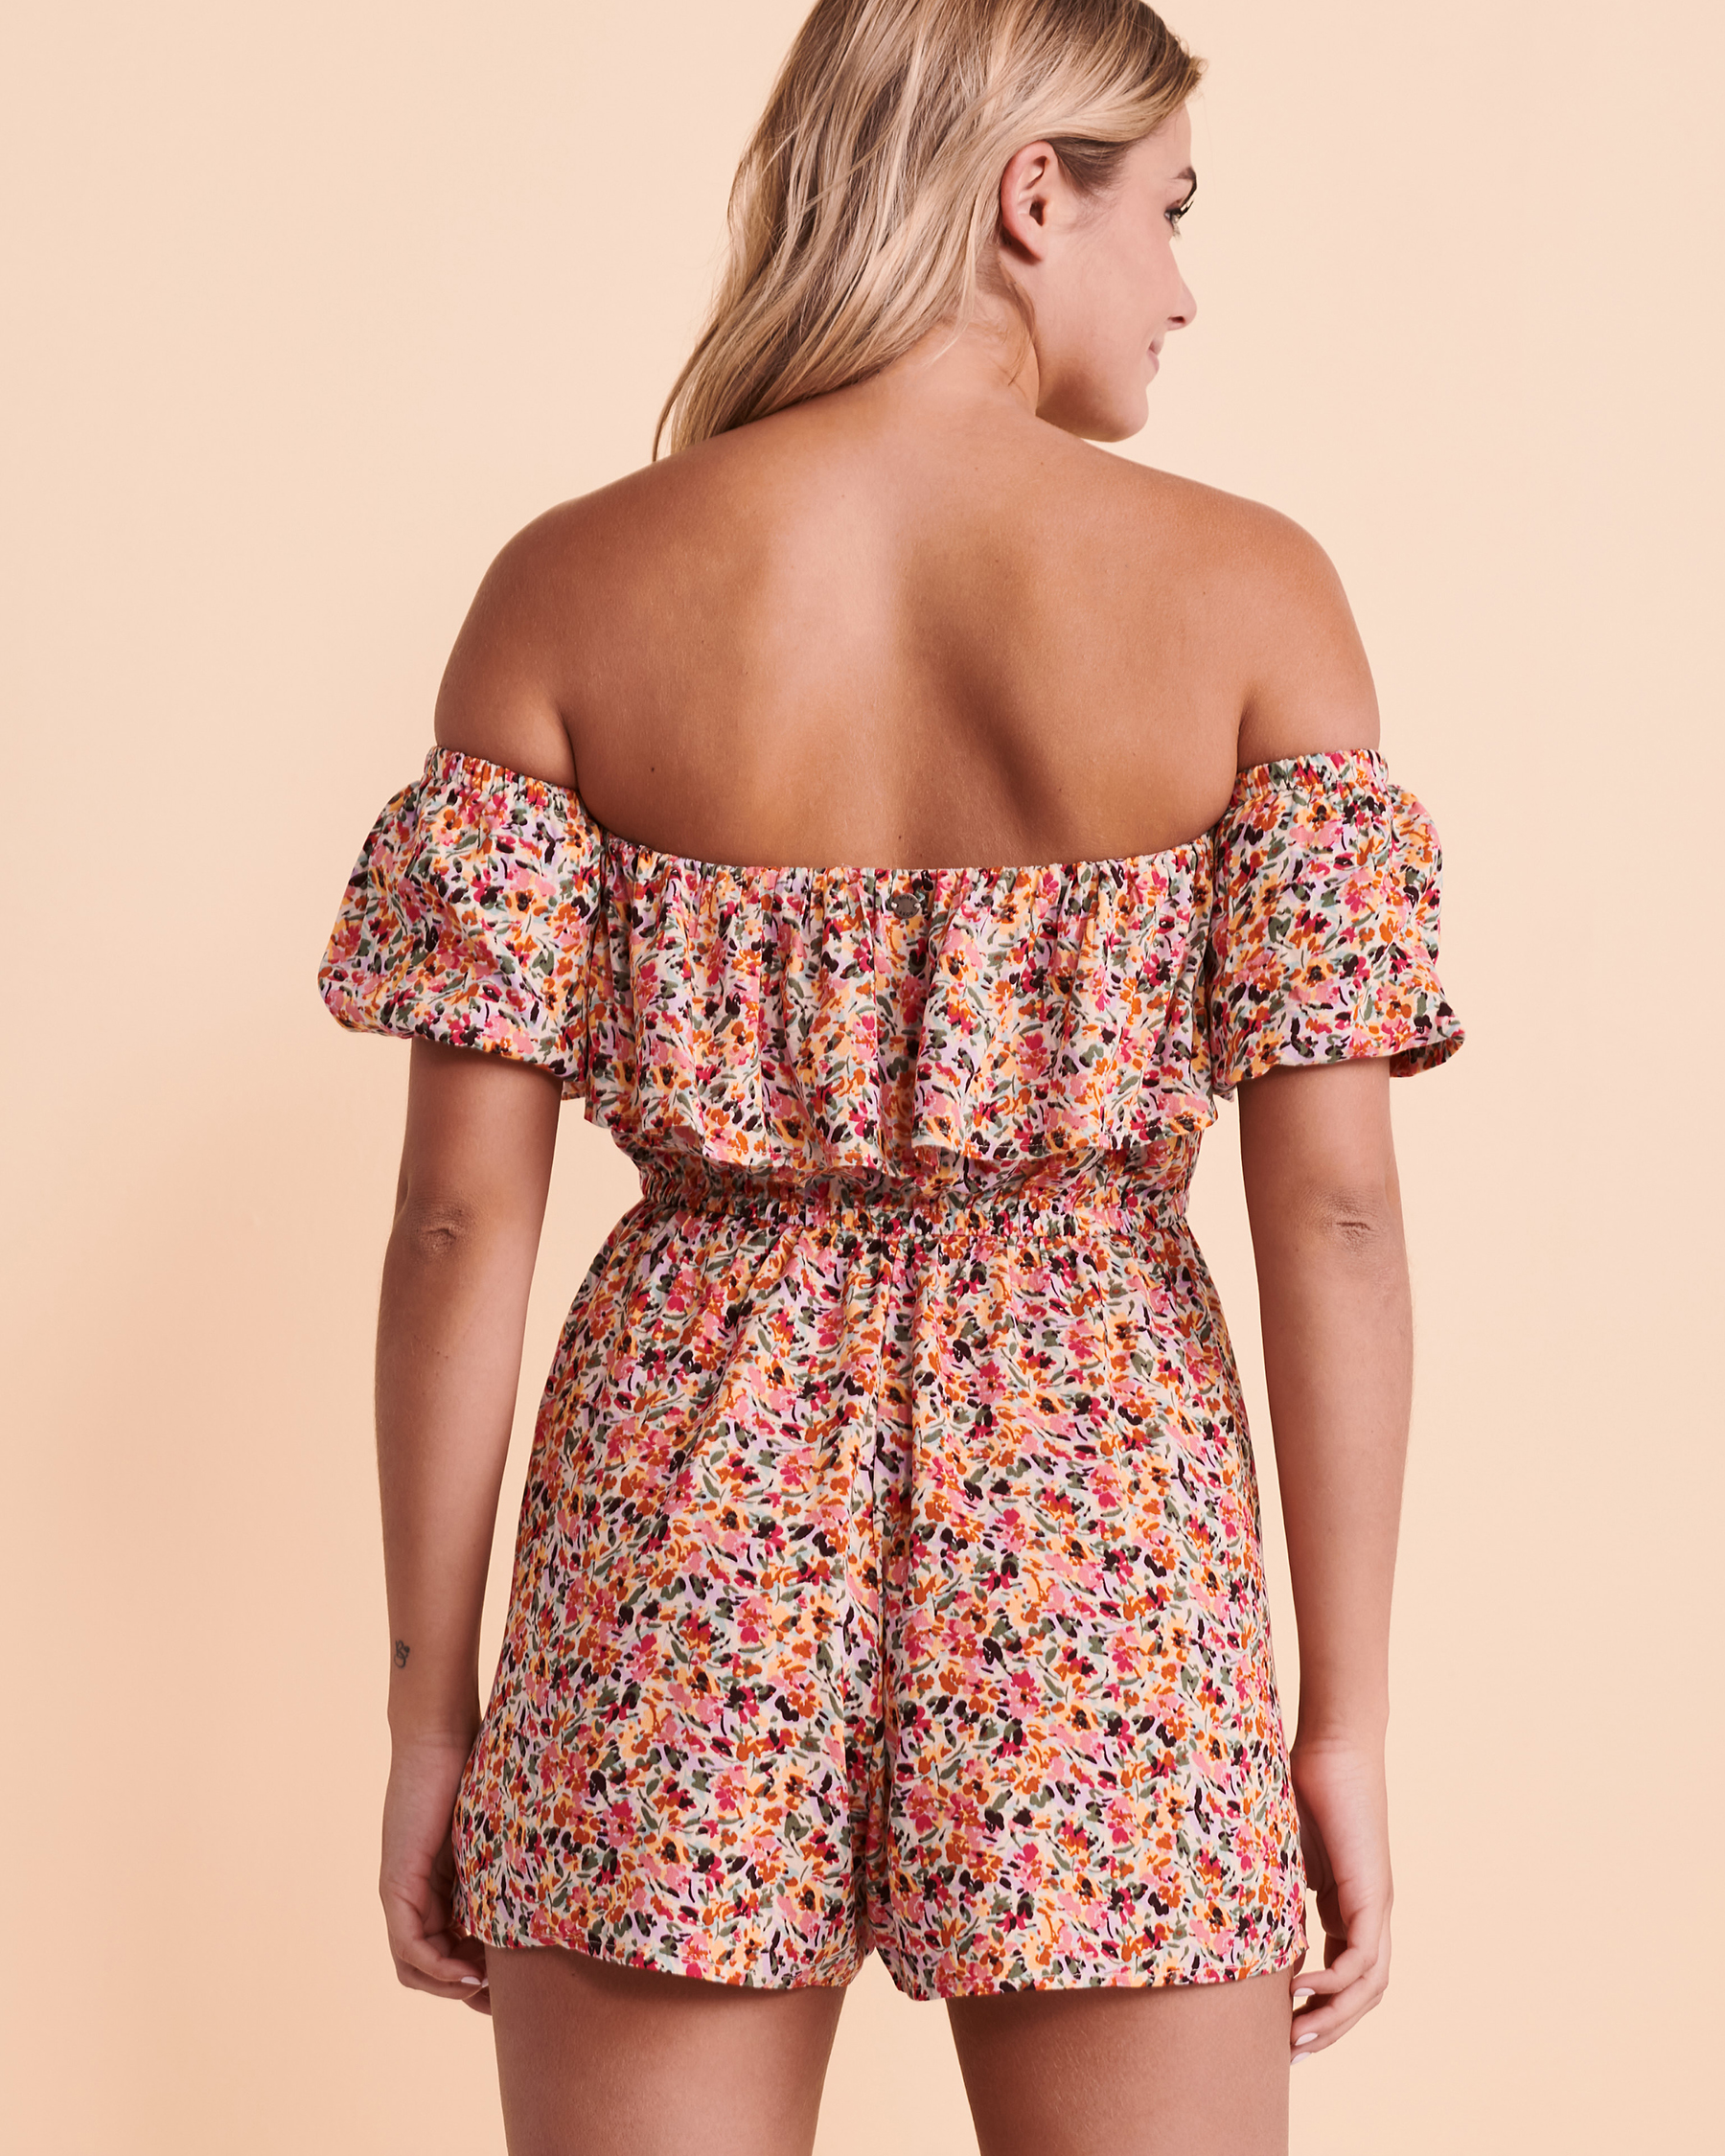 ROXY ANOTHER DAY Off-the-shoulder Romper Floral ARJWD03455 - View3